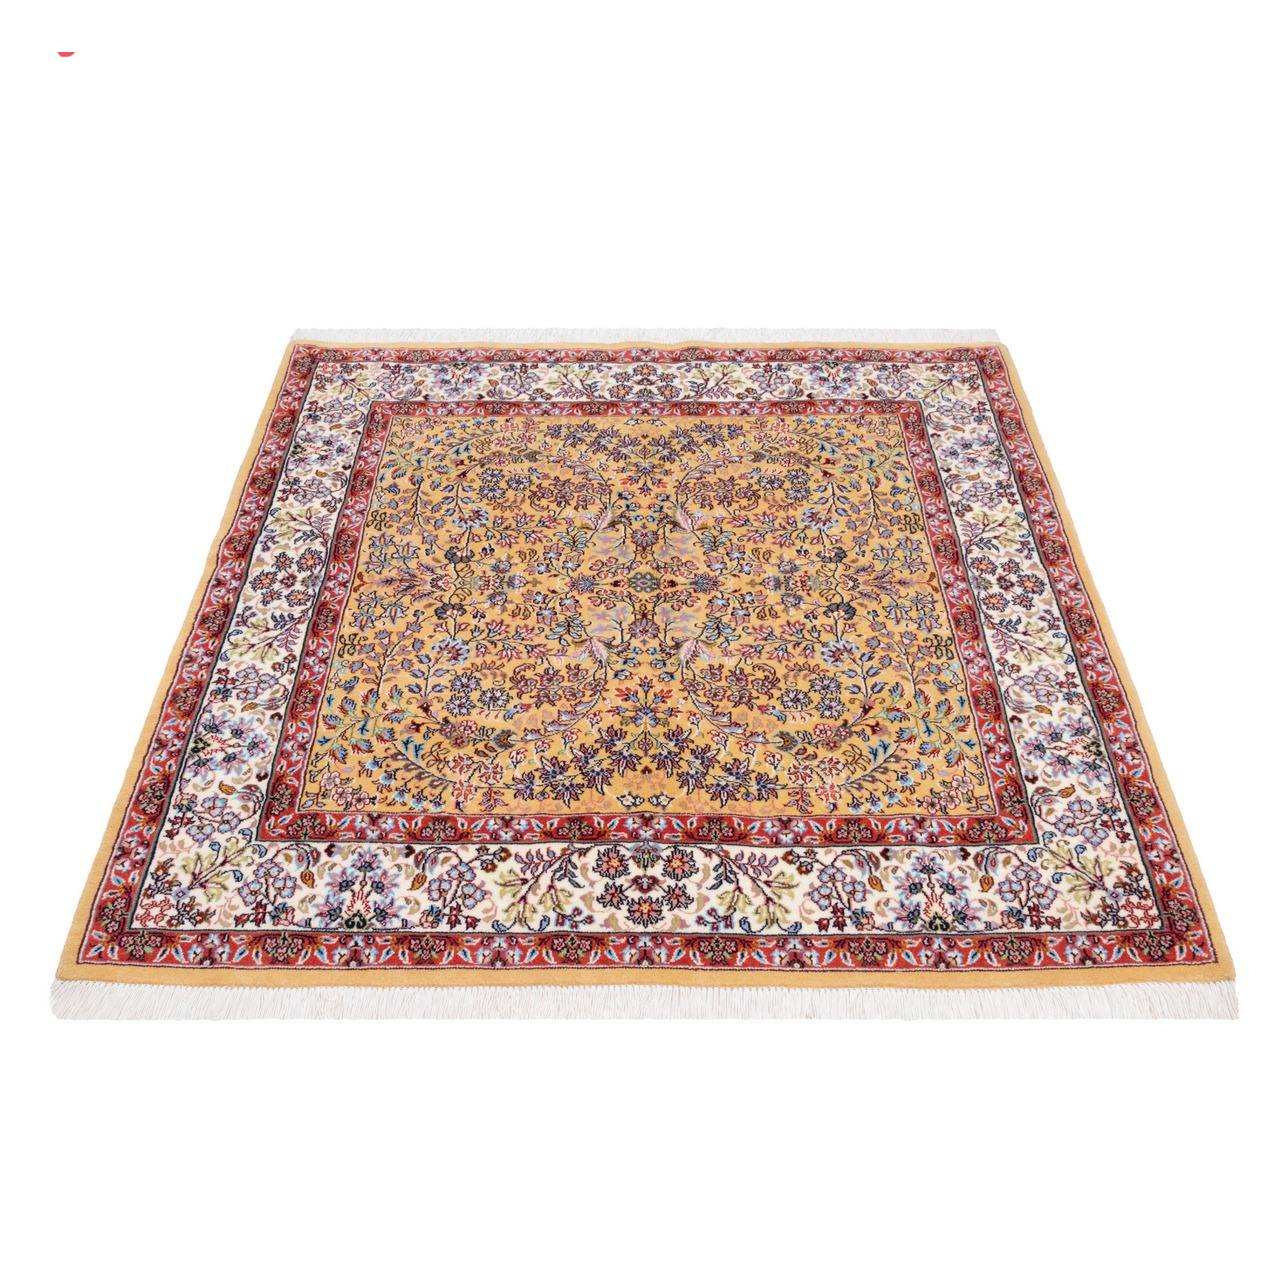 Two and a half meter handmade carpet by Persia, code 174556